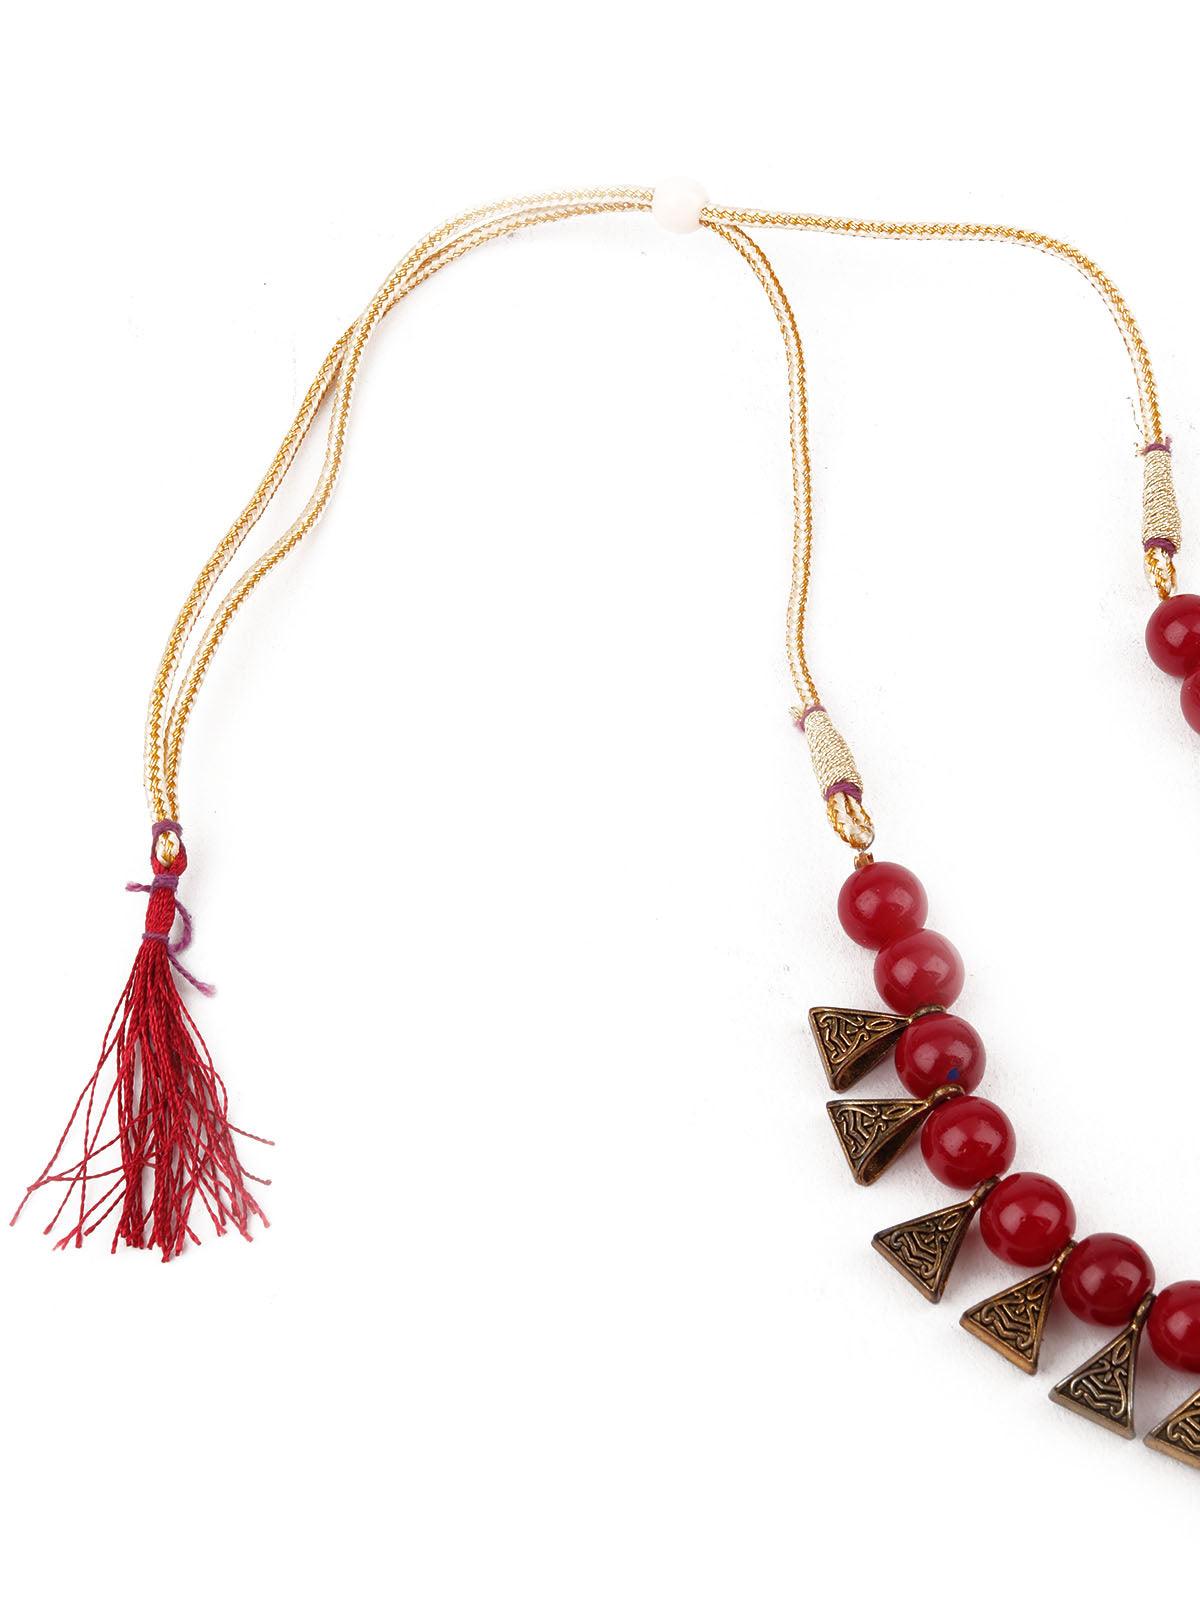 Women's Red And Gold Tribal Long Neckpiece - Odette